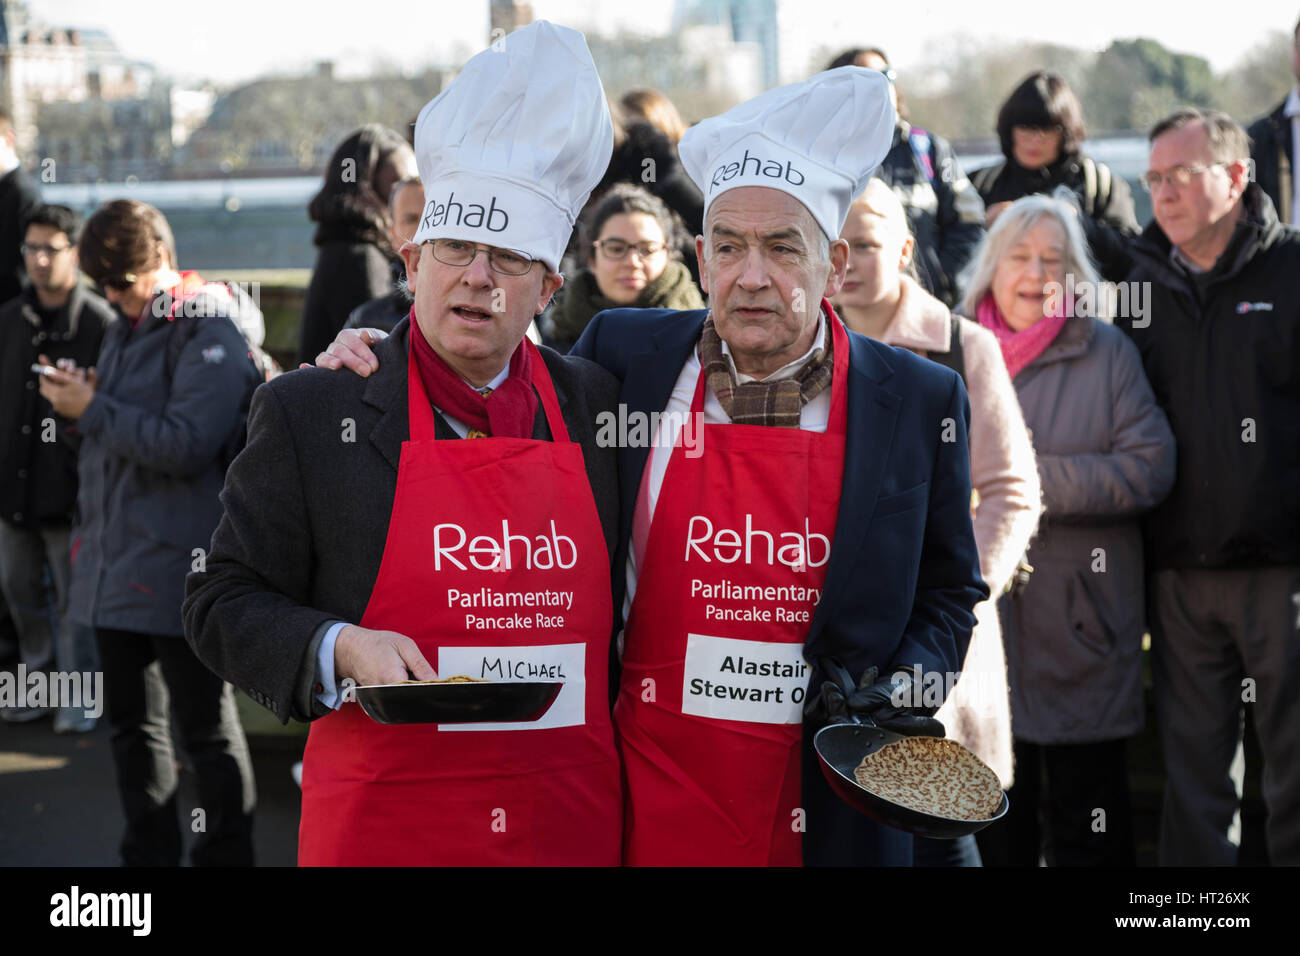 Michael Crick(L), Political Correspondent, Channel 4 News and Alastair Stewart OBE(R), Presenter, ITV News. MPs, Lords and Media attend the 20th Annual Rehab Parliamentary Pancake Race at Victoria Gardens in Westminster, London, UK. Stock Photo